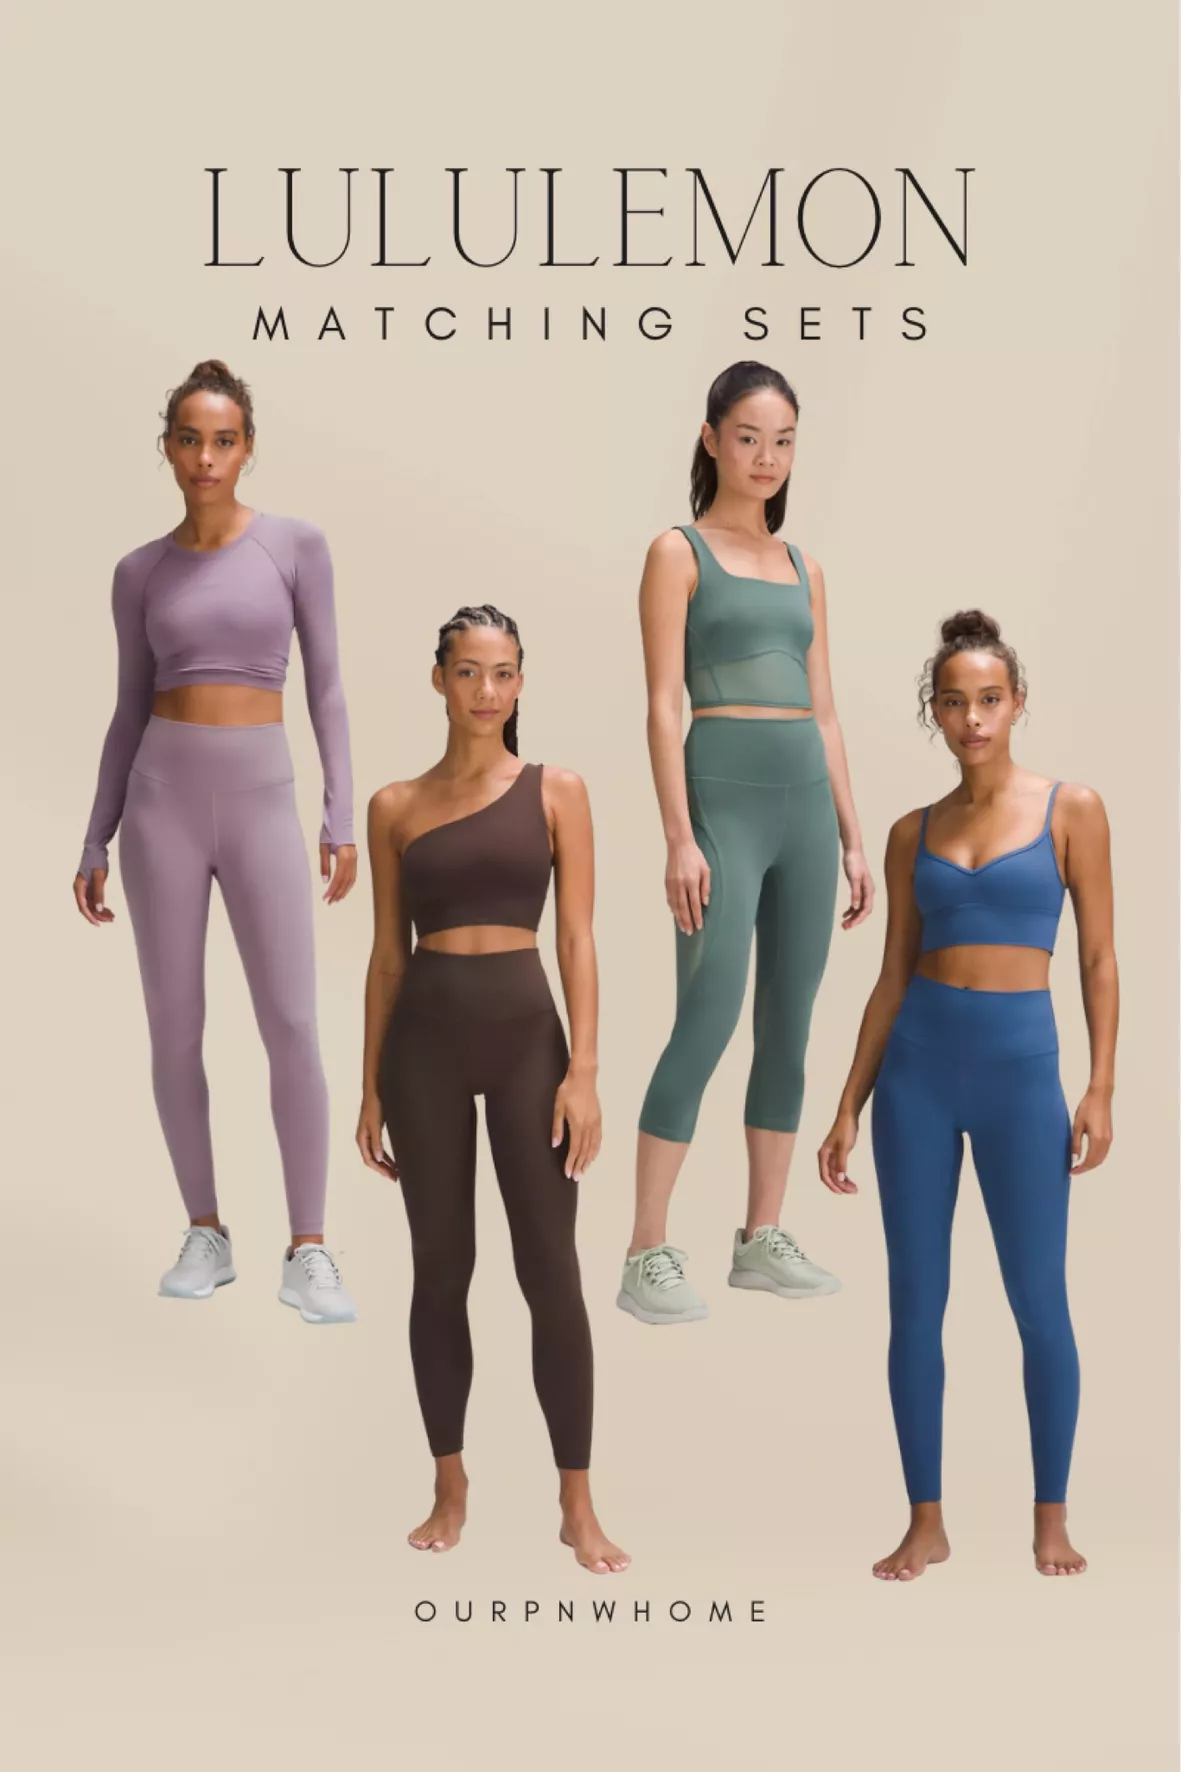 Give me all the matching sets!! : r/lululemon